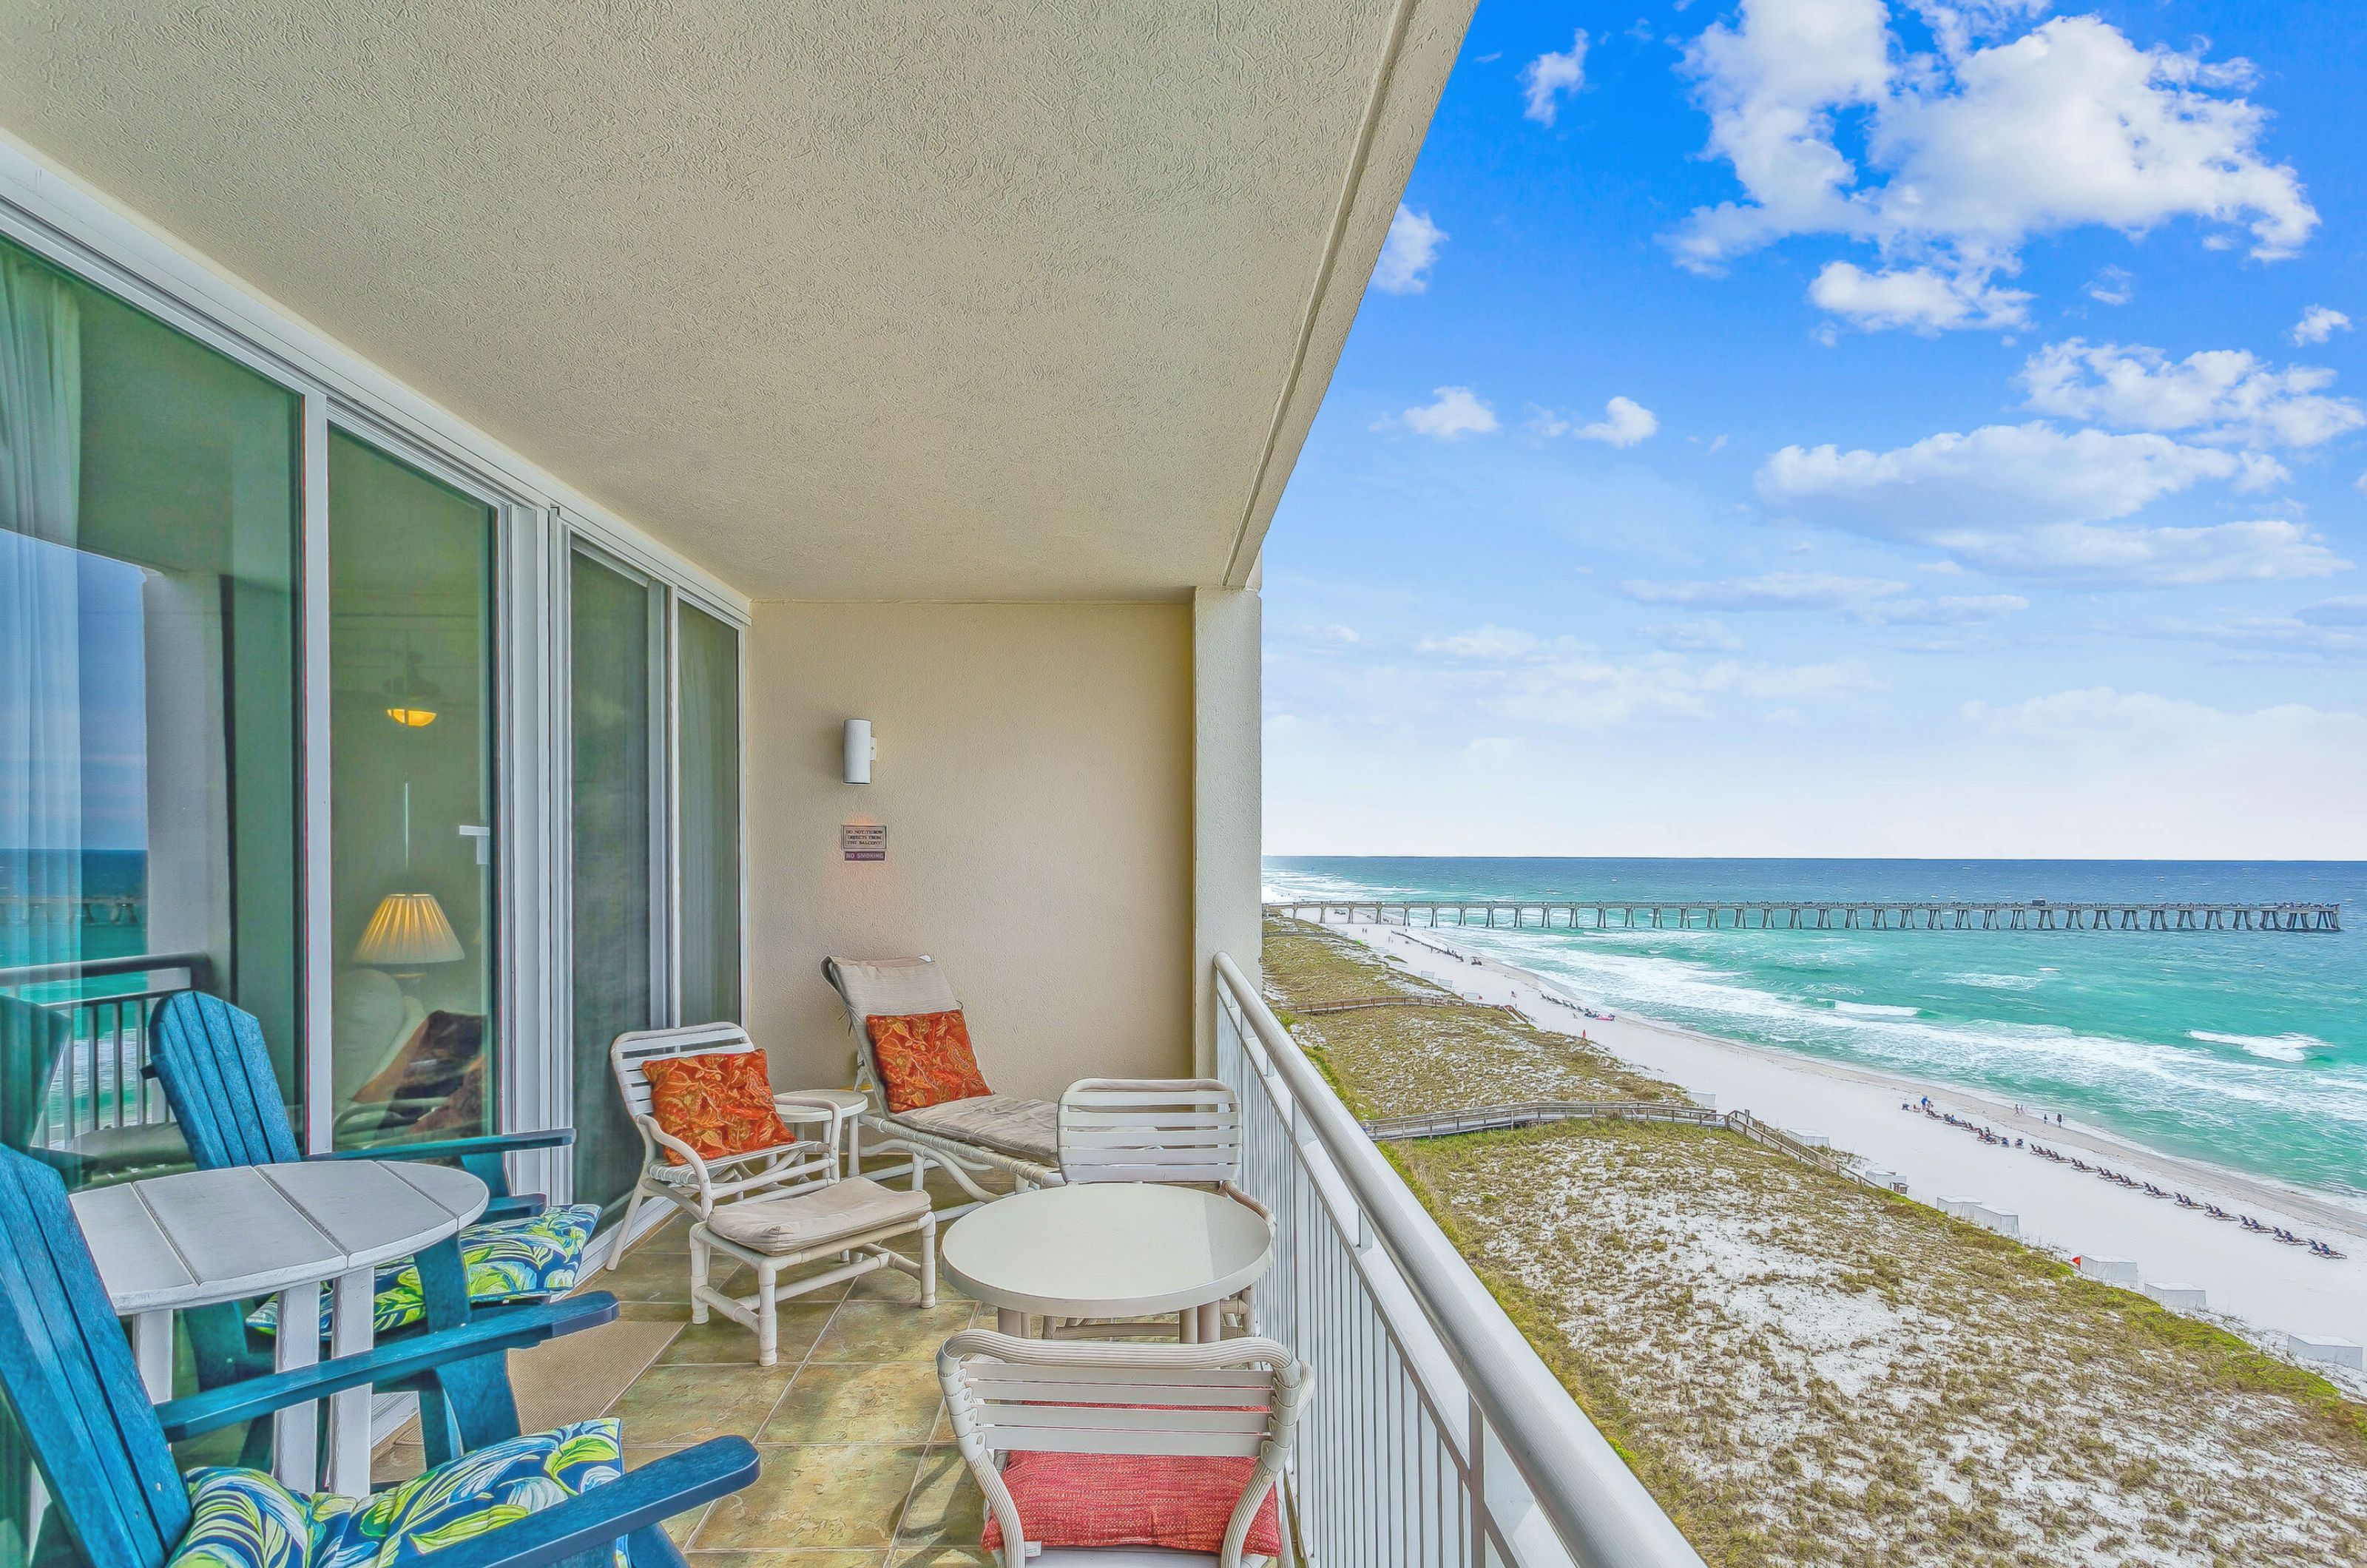 Private balcony with lounge chairs and tables over looking the Gulf of Mexico